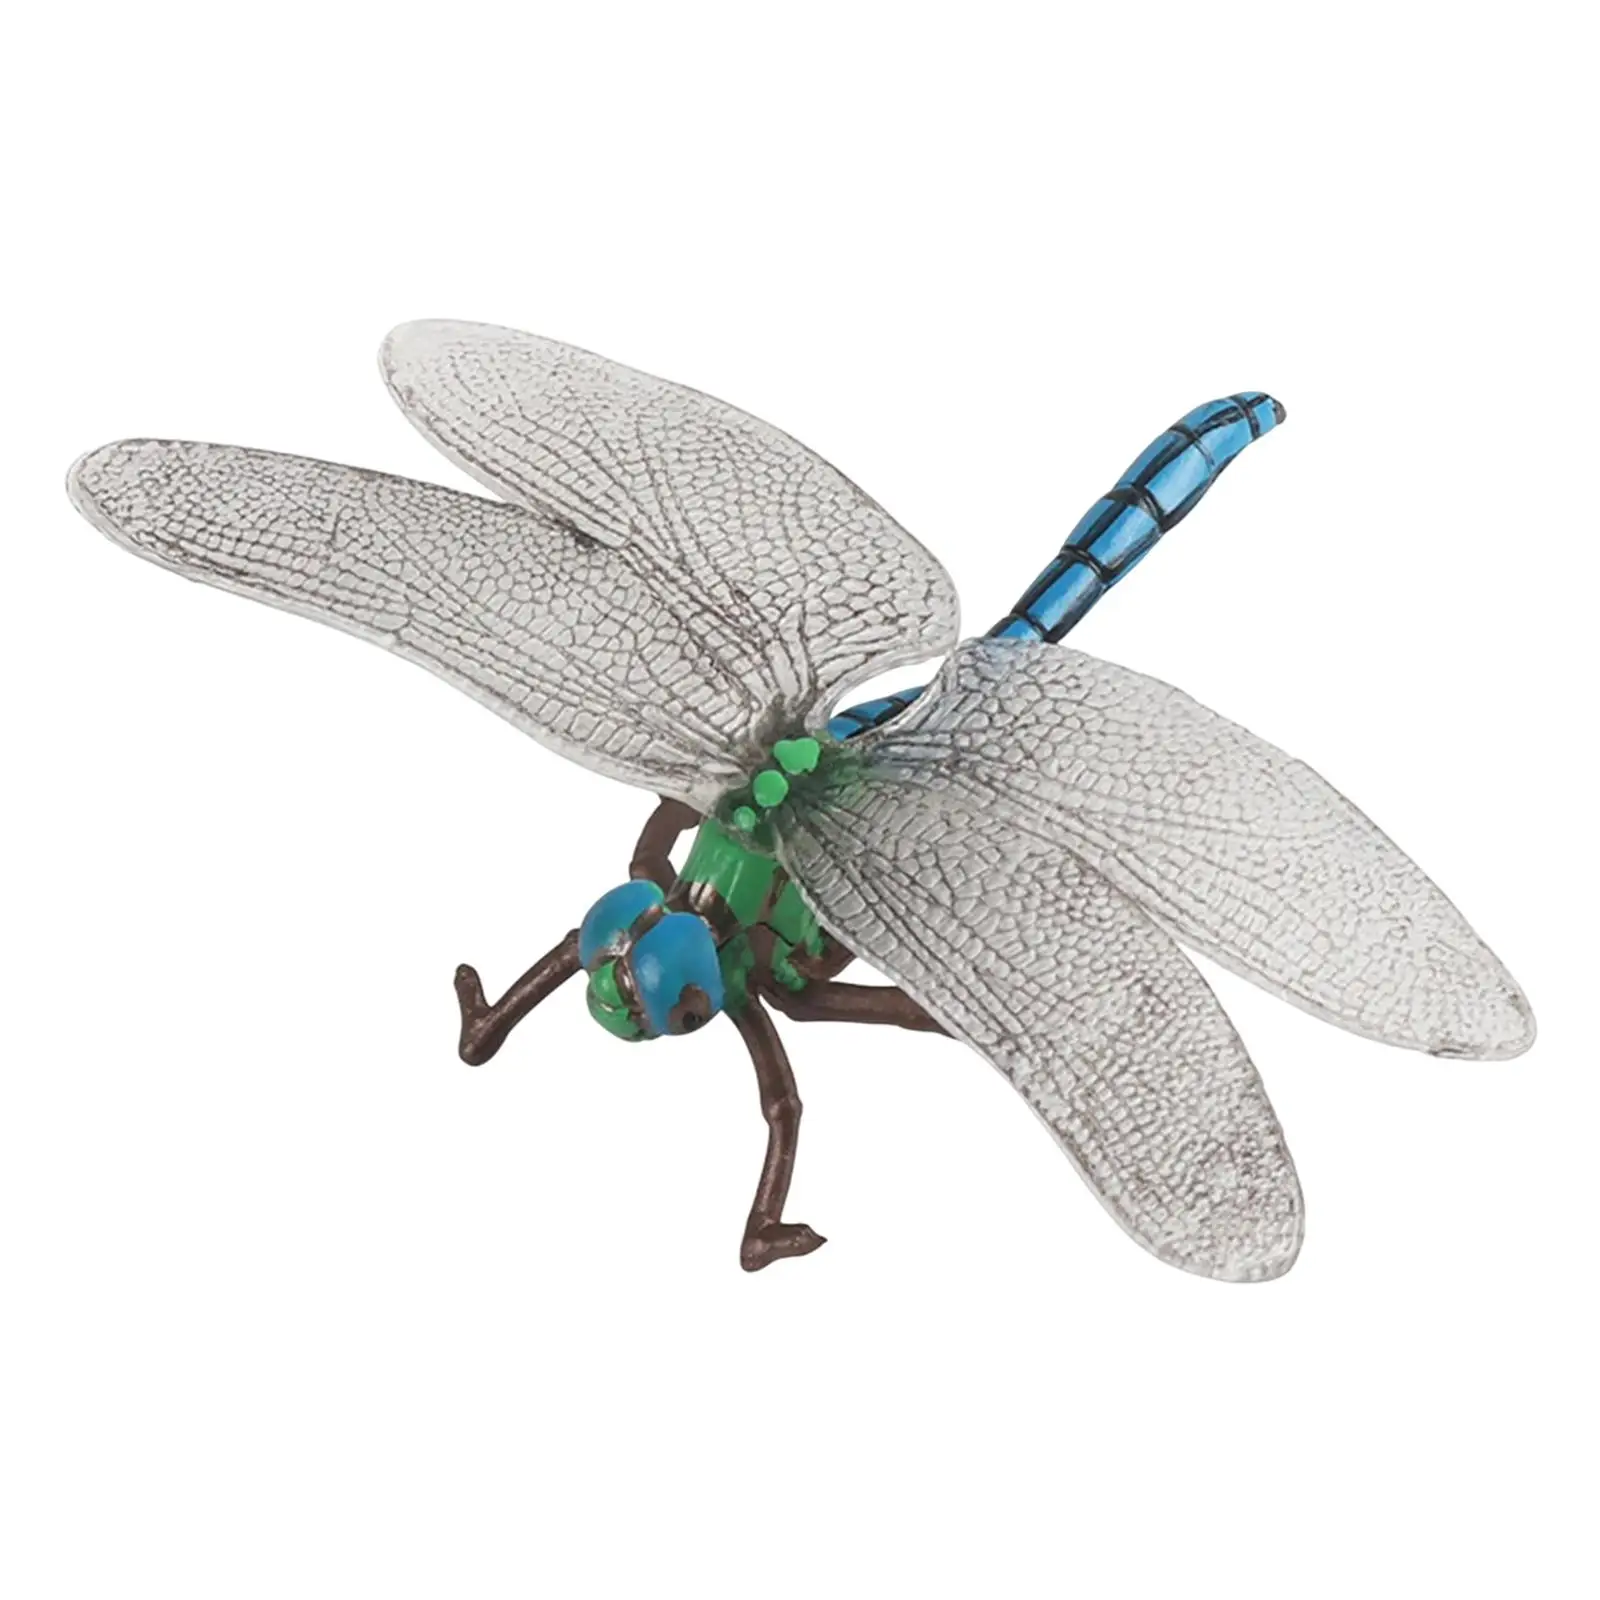 Lifelike Dragonfly Figurine Home Decor Party Favors Micro Landscape for Children